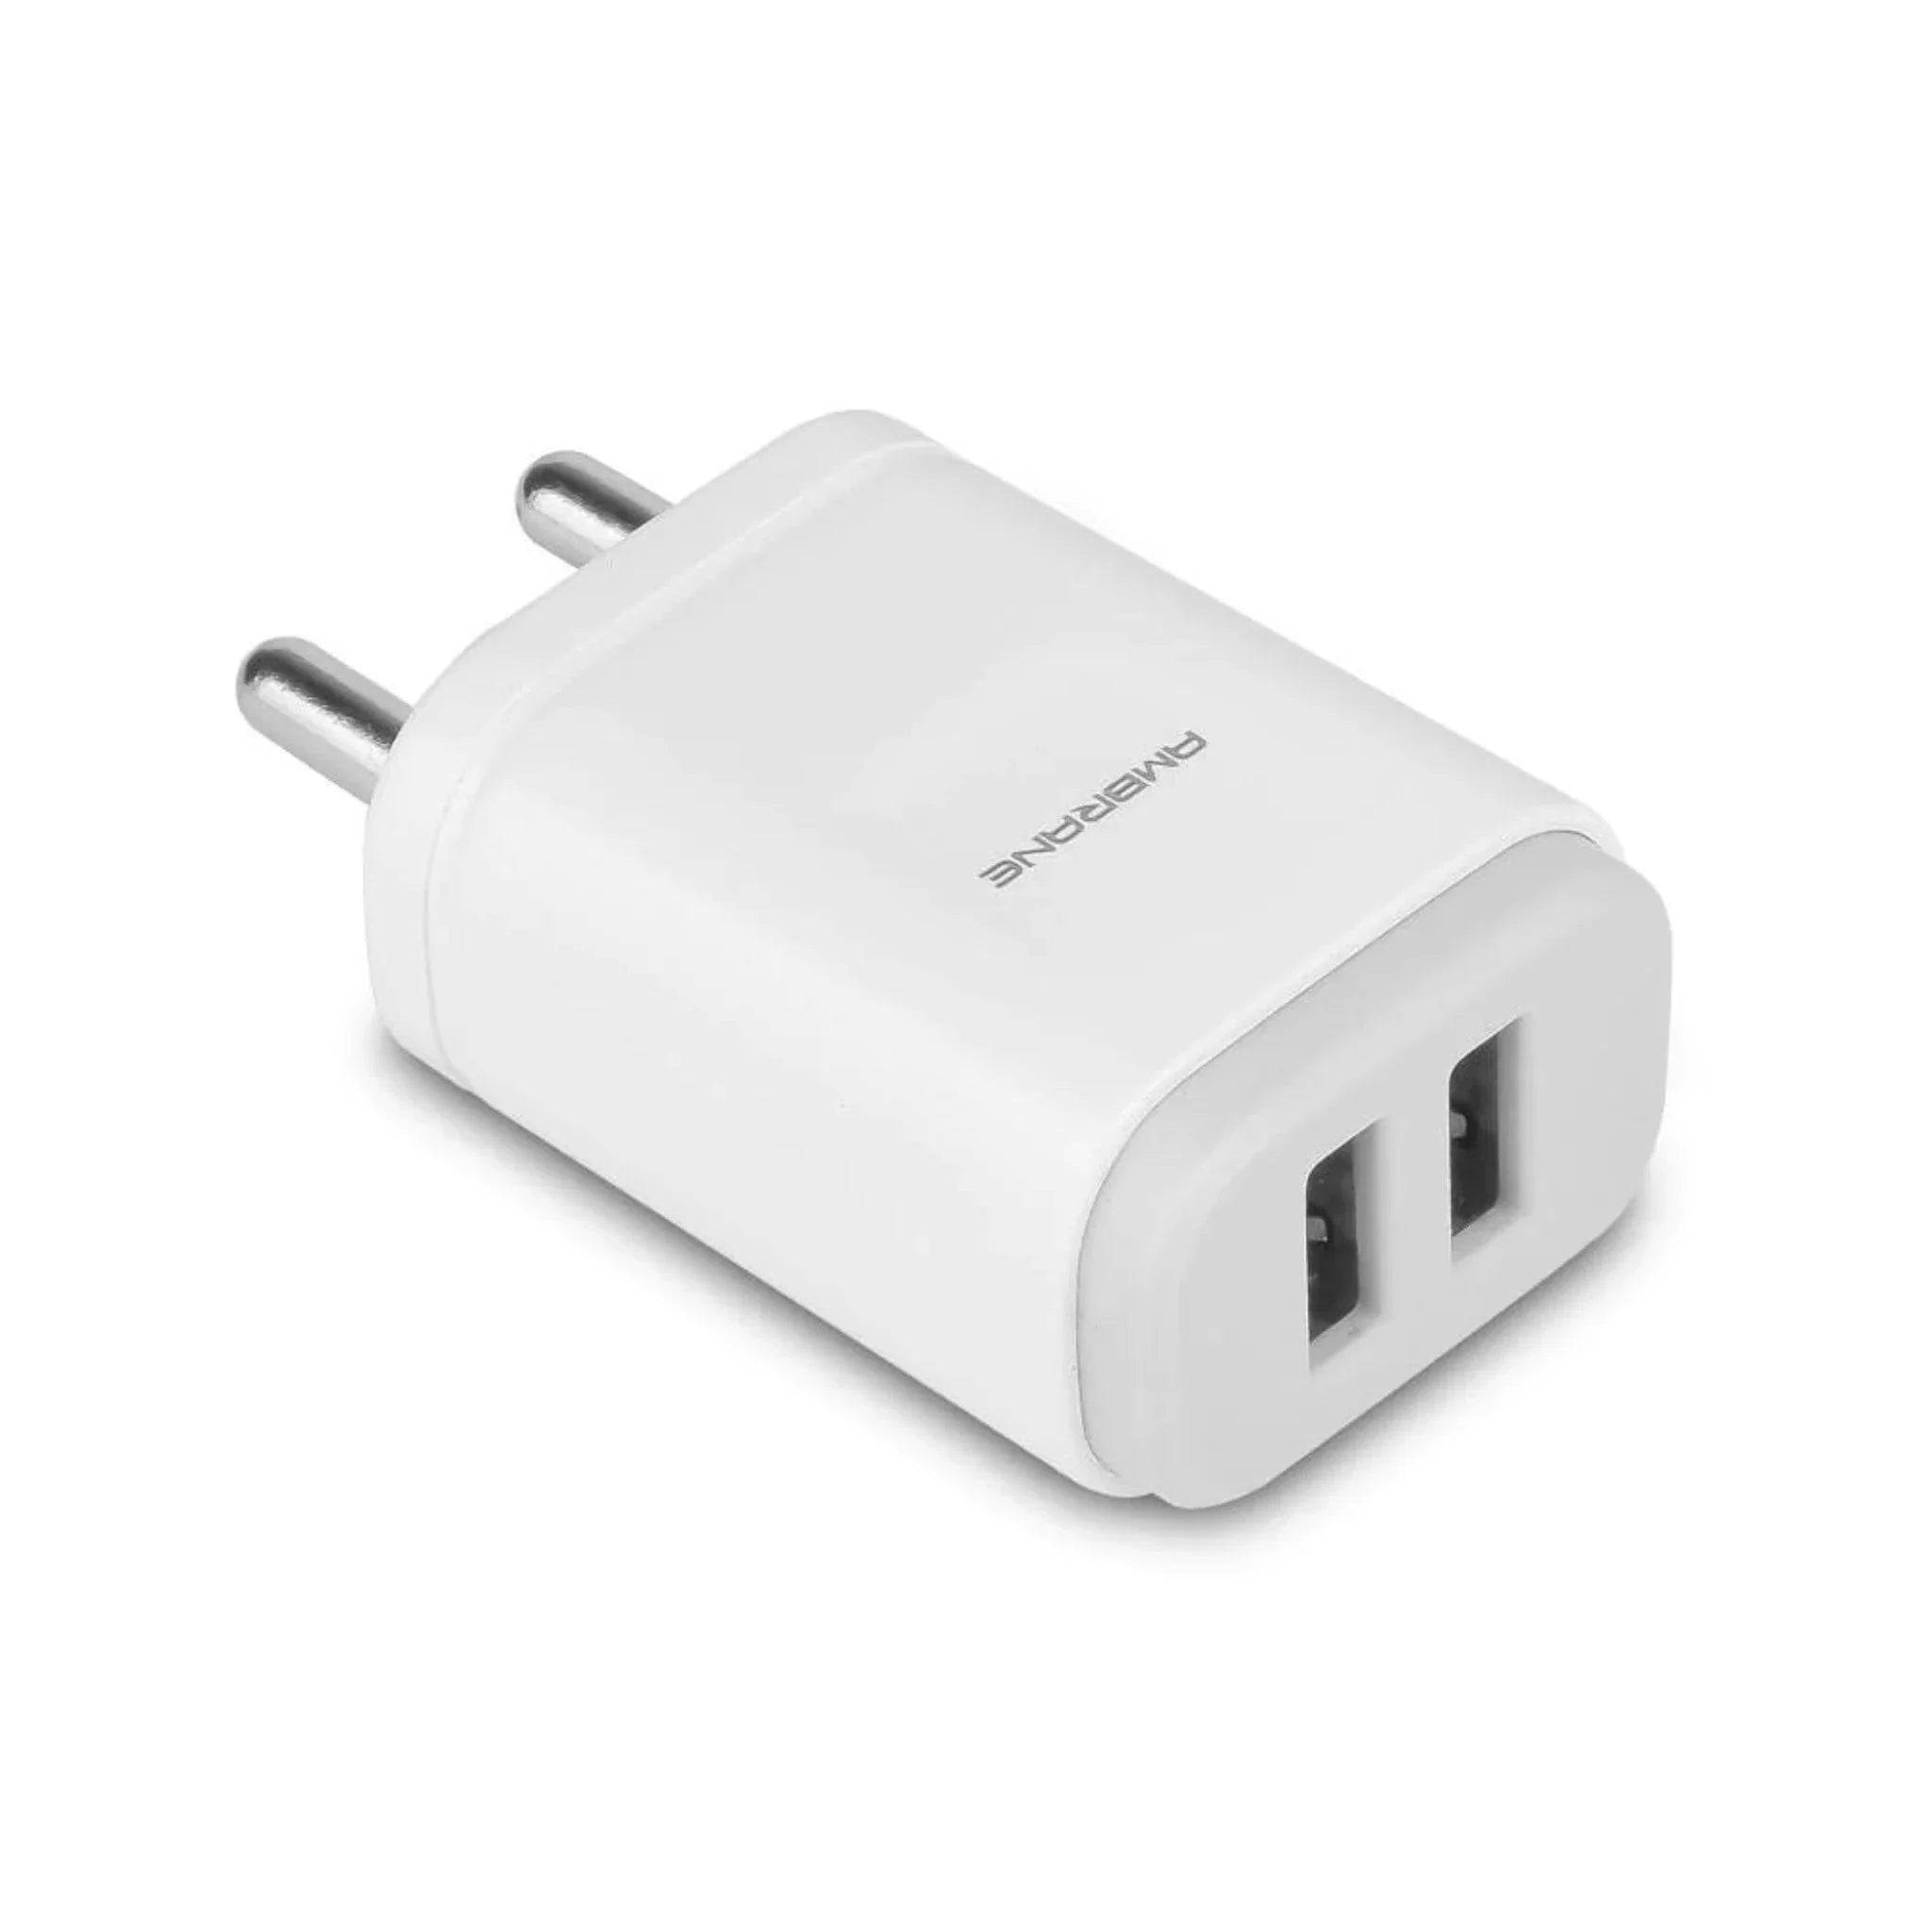 Ambrane Dual Port Wall Charger 2.1 Amp w/o Cable - AWC-29 W/o Cable